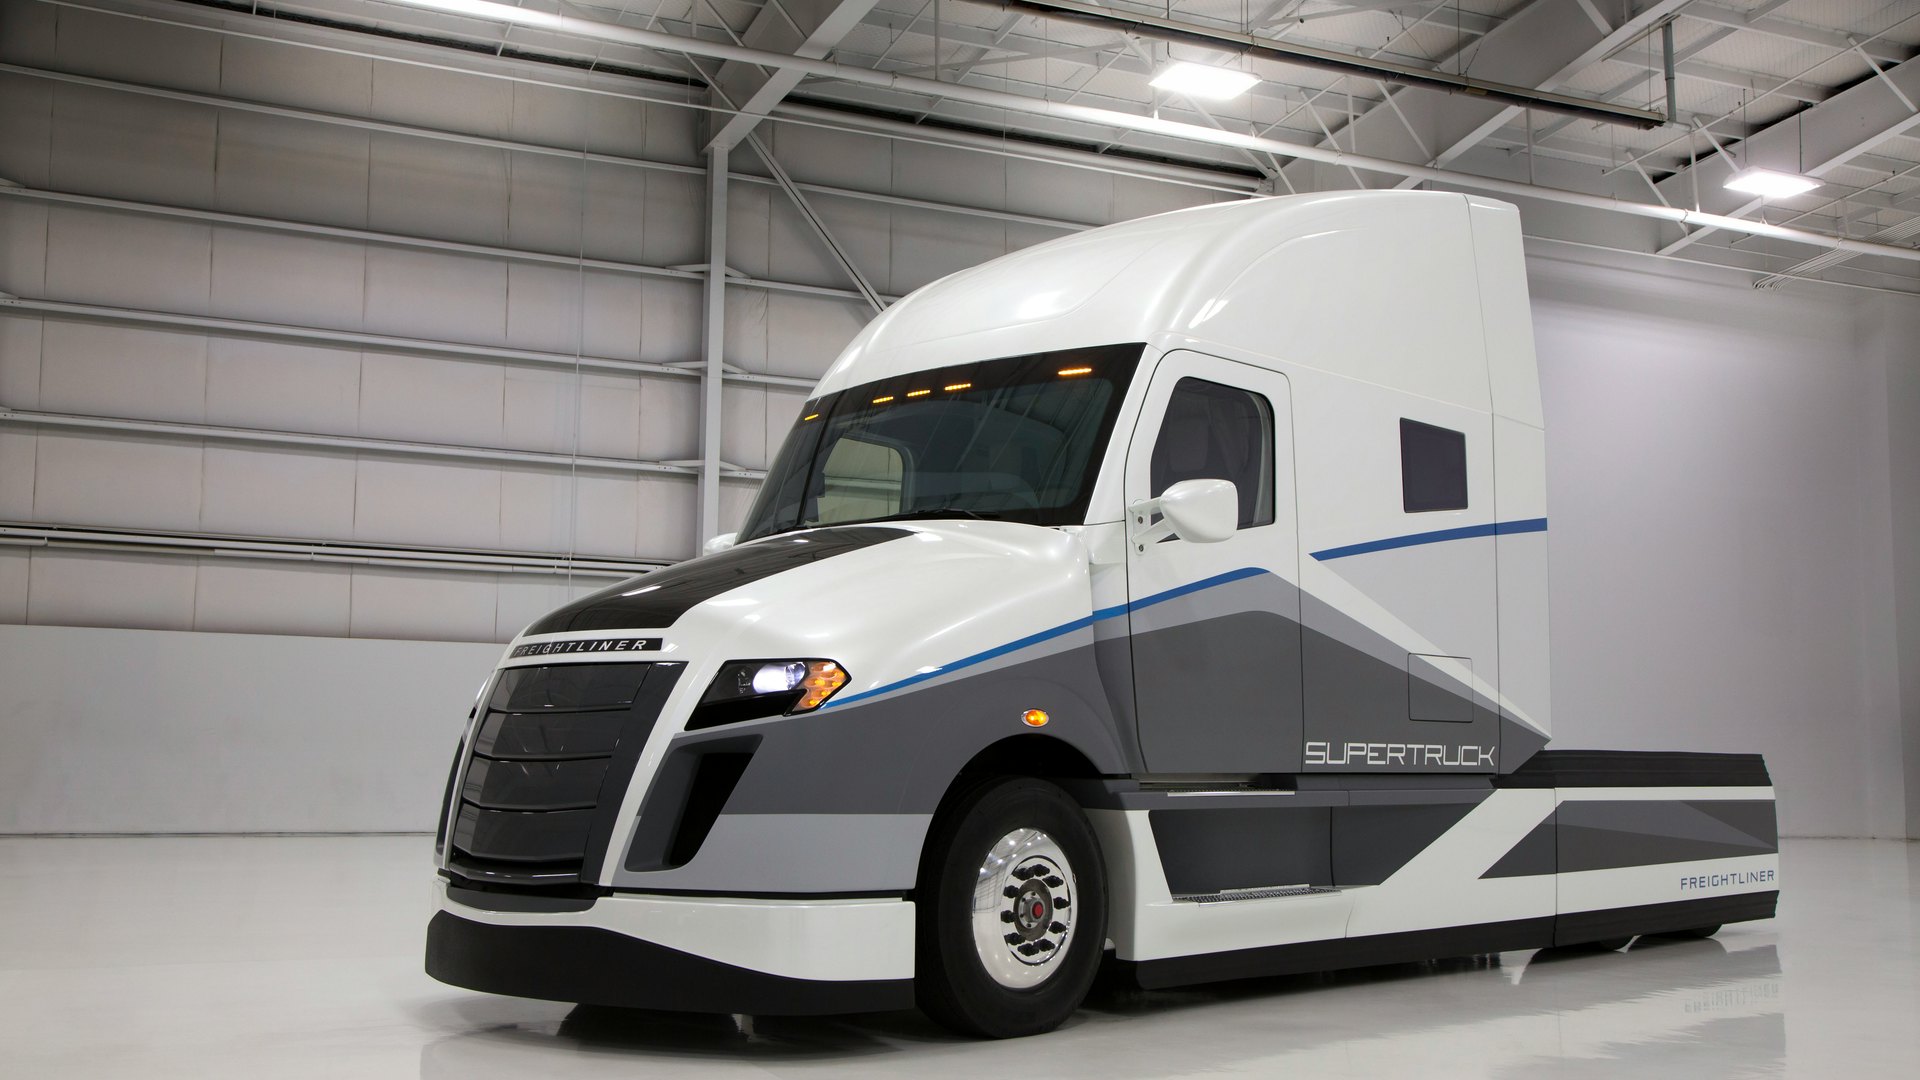 SuperTruck led to real-world truck gains, and more are coming